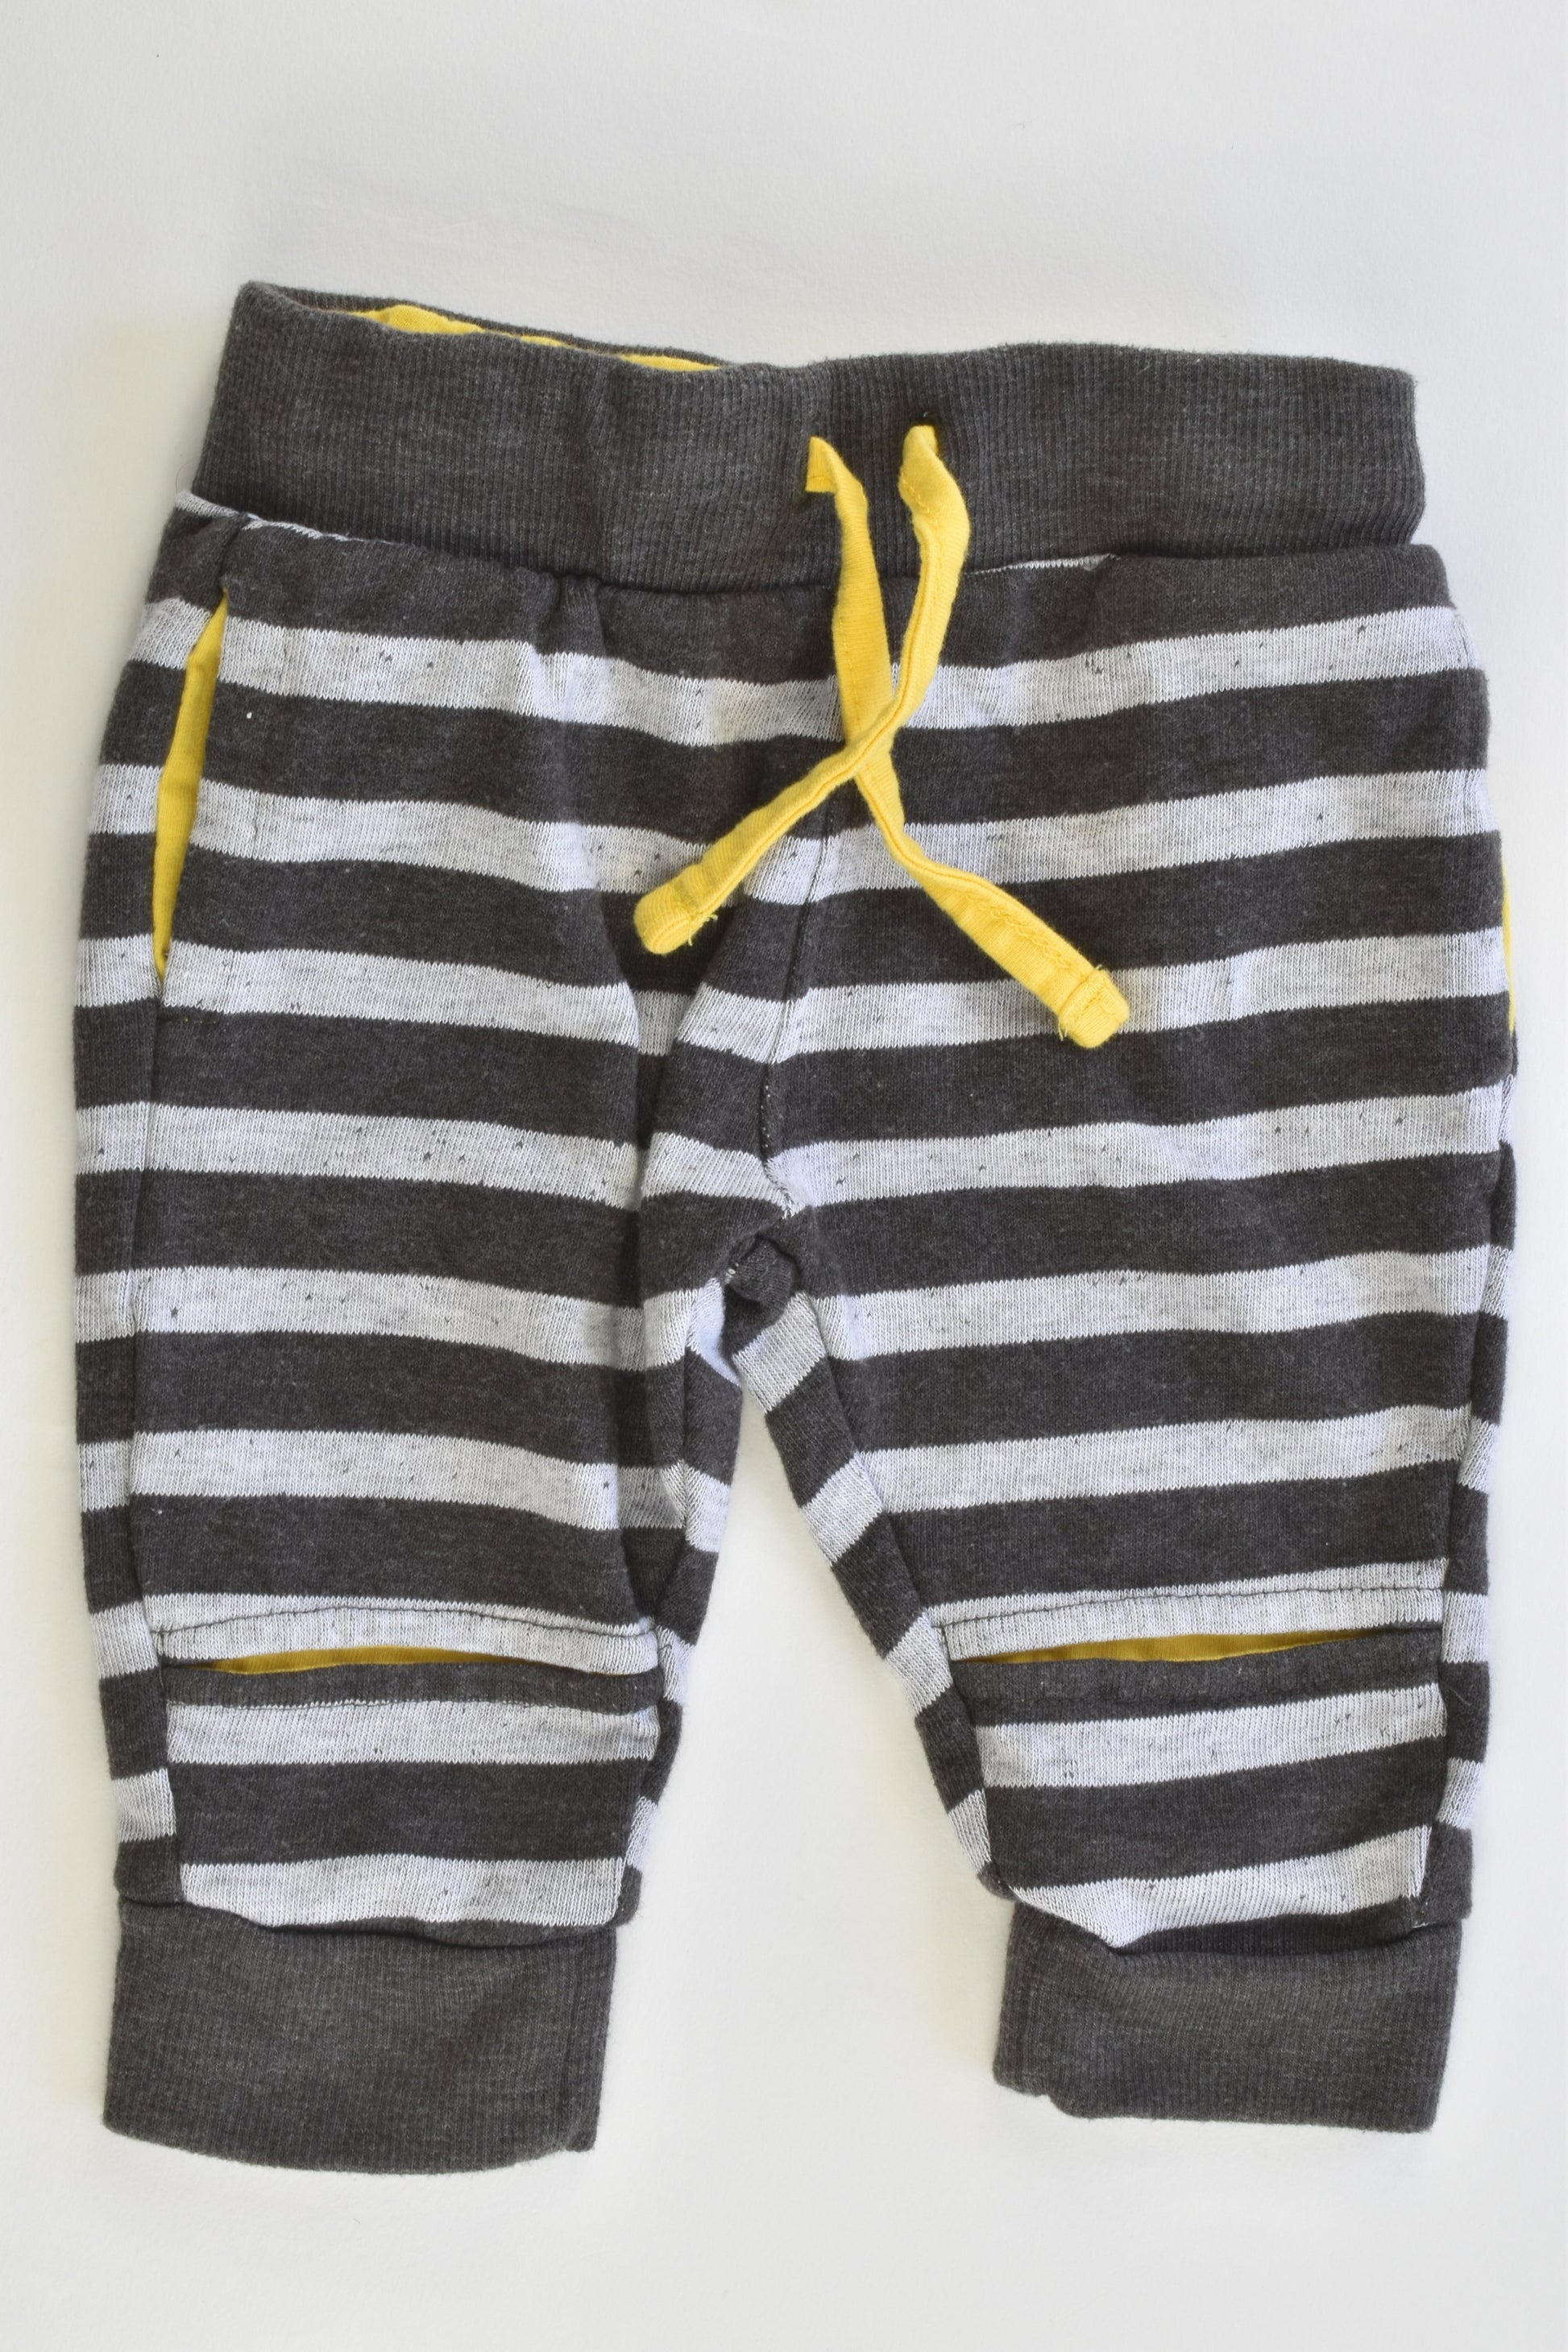 Target Size 000 (0-3 months) Striped Track Pants